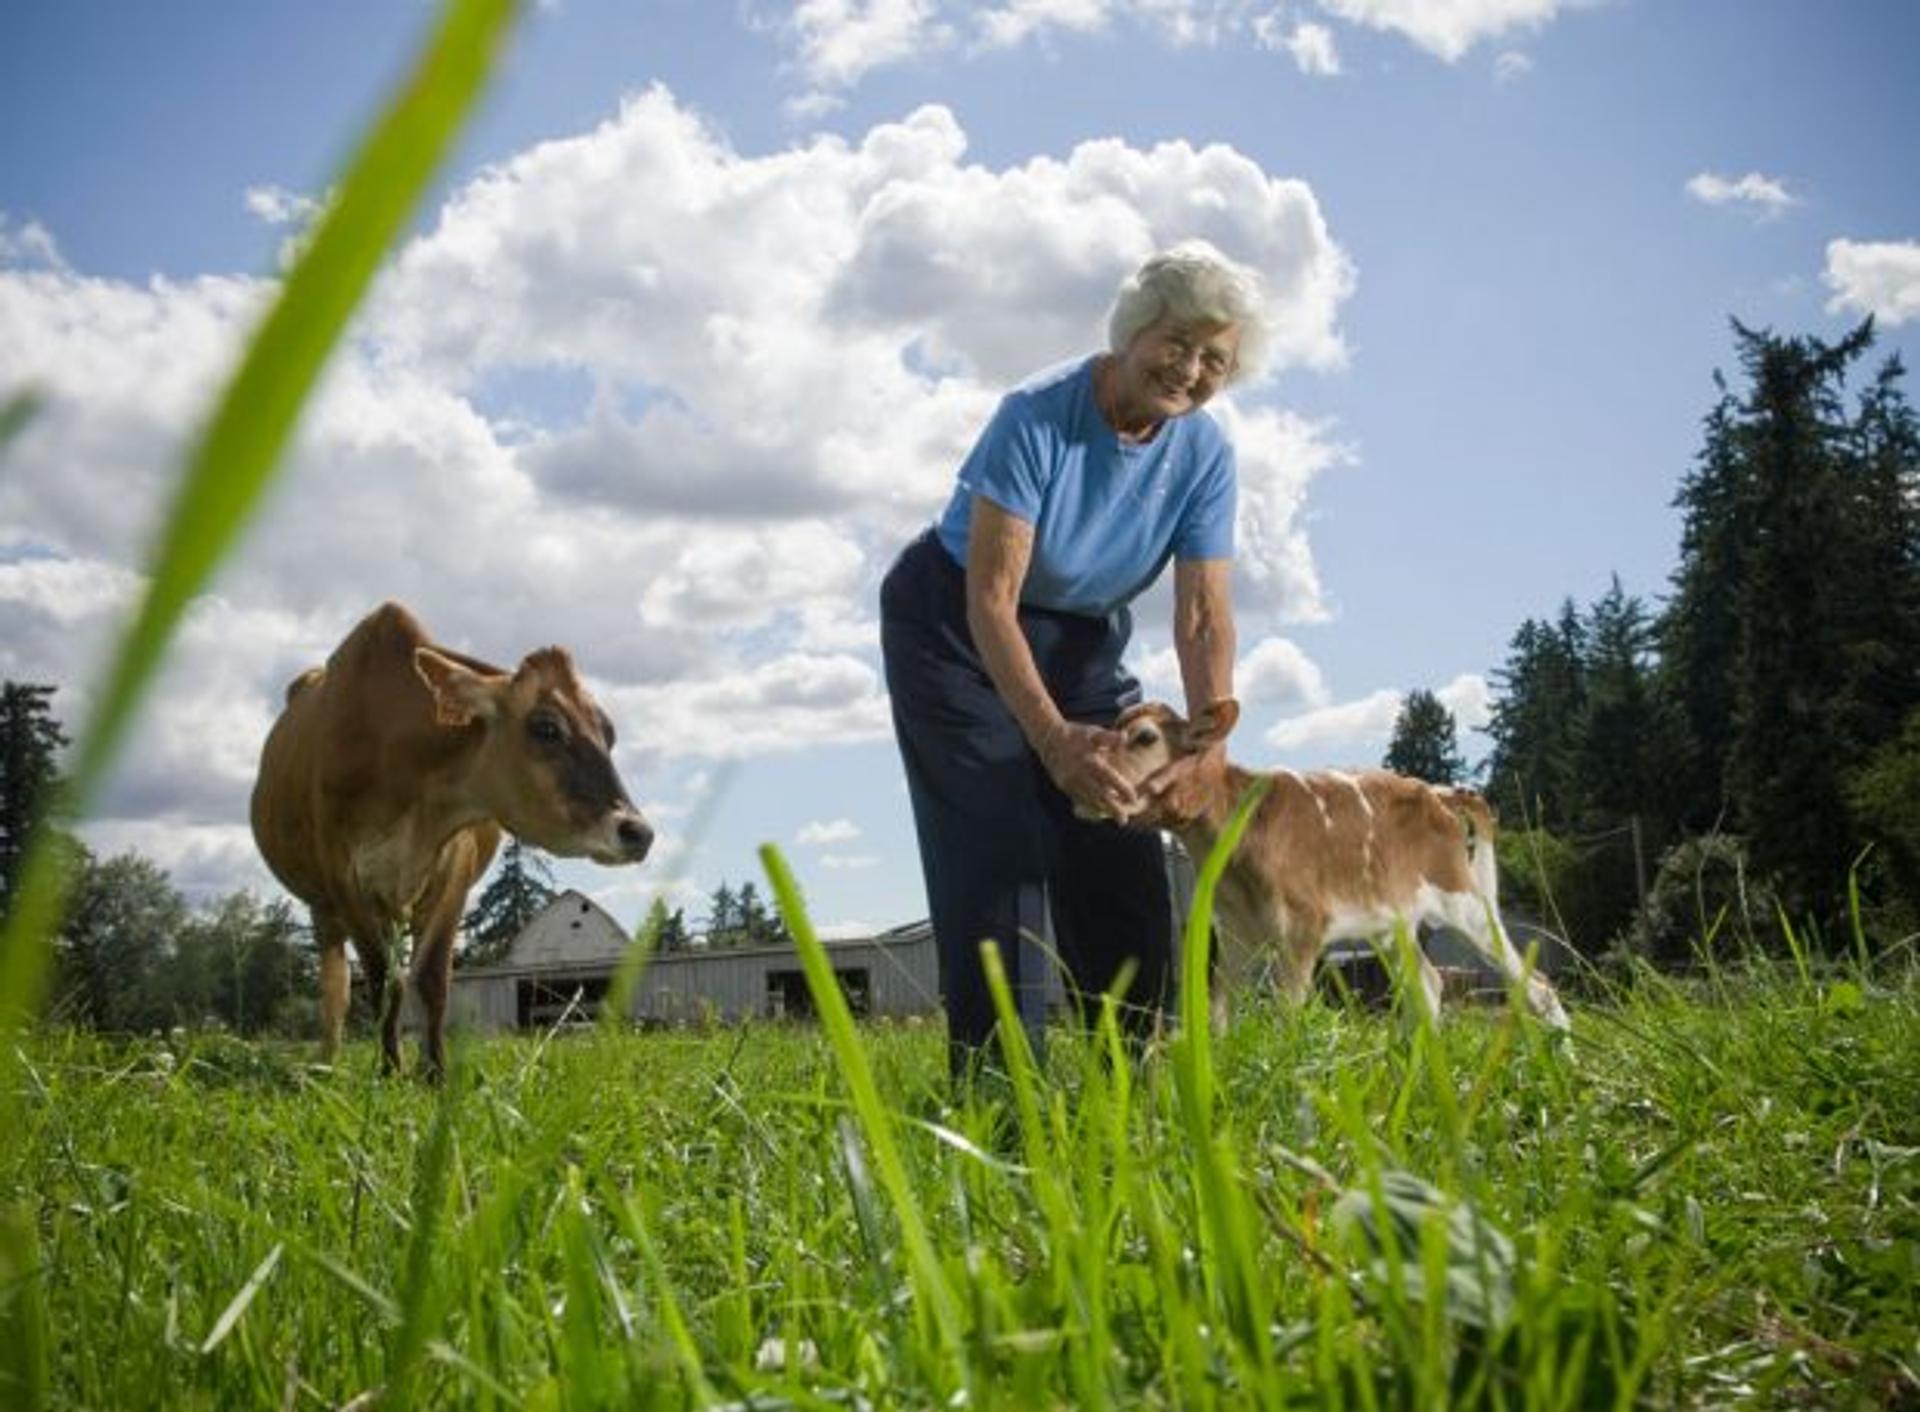 Grandmother farmer stands in the pasture and pets a calf while looking at the camera and smiling.